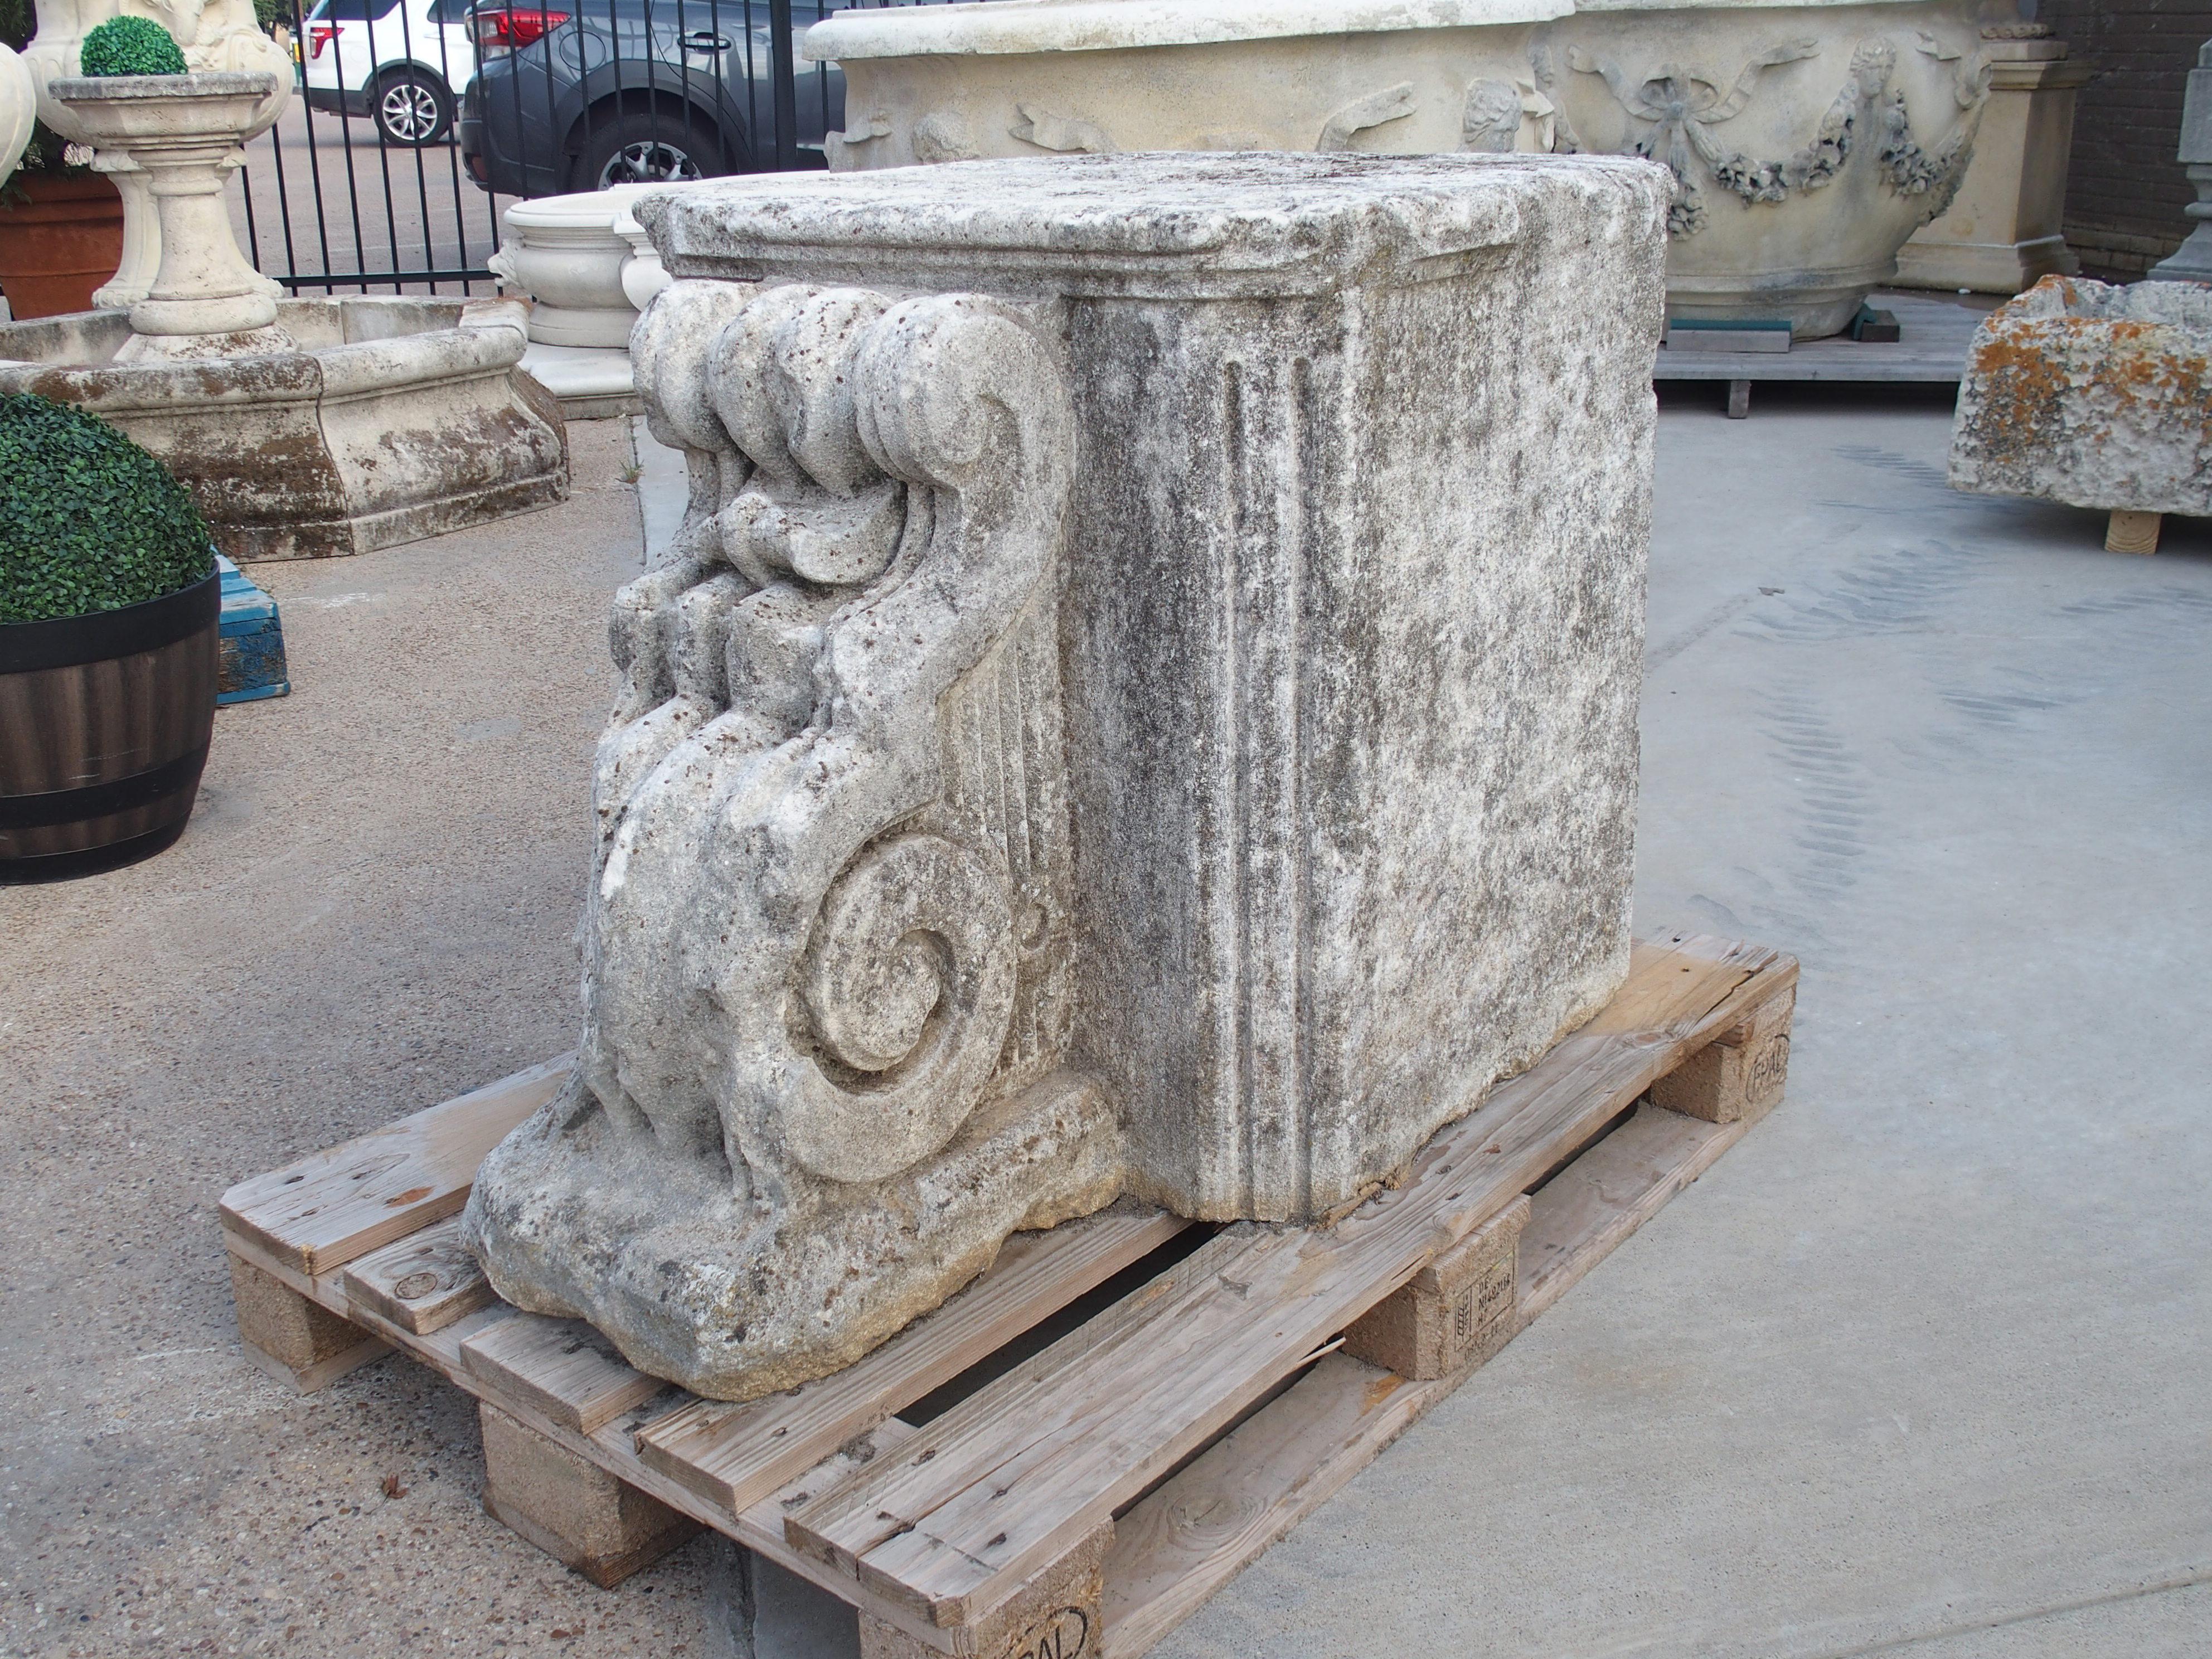 Truly a one-of-a-kind offering, this chateau column base was hand-carved in Dijon, France, circa 1750, making it a Louis XV period architectural. Carved from a single block of limestone, the robust column boasts canted edges adorned with elegant